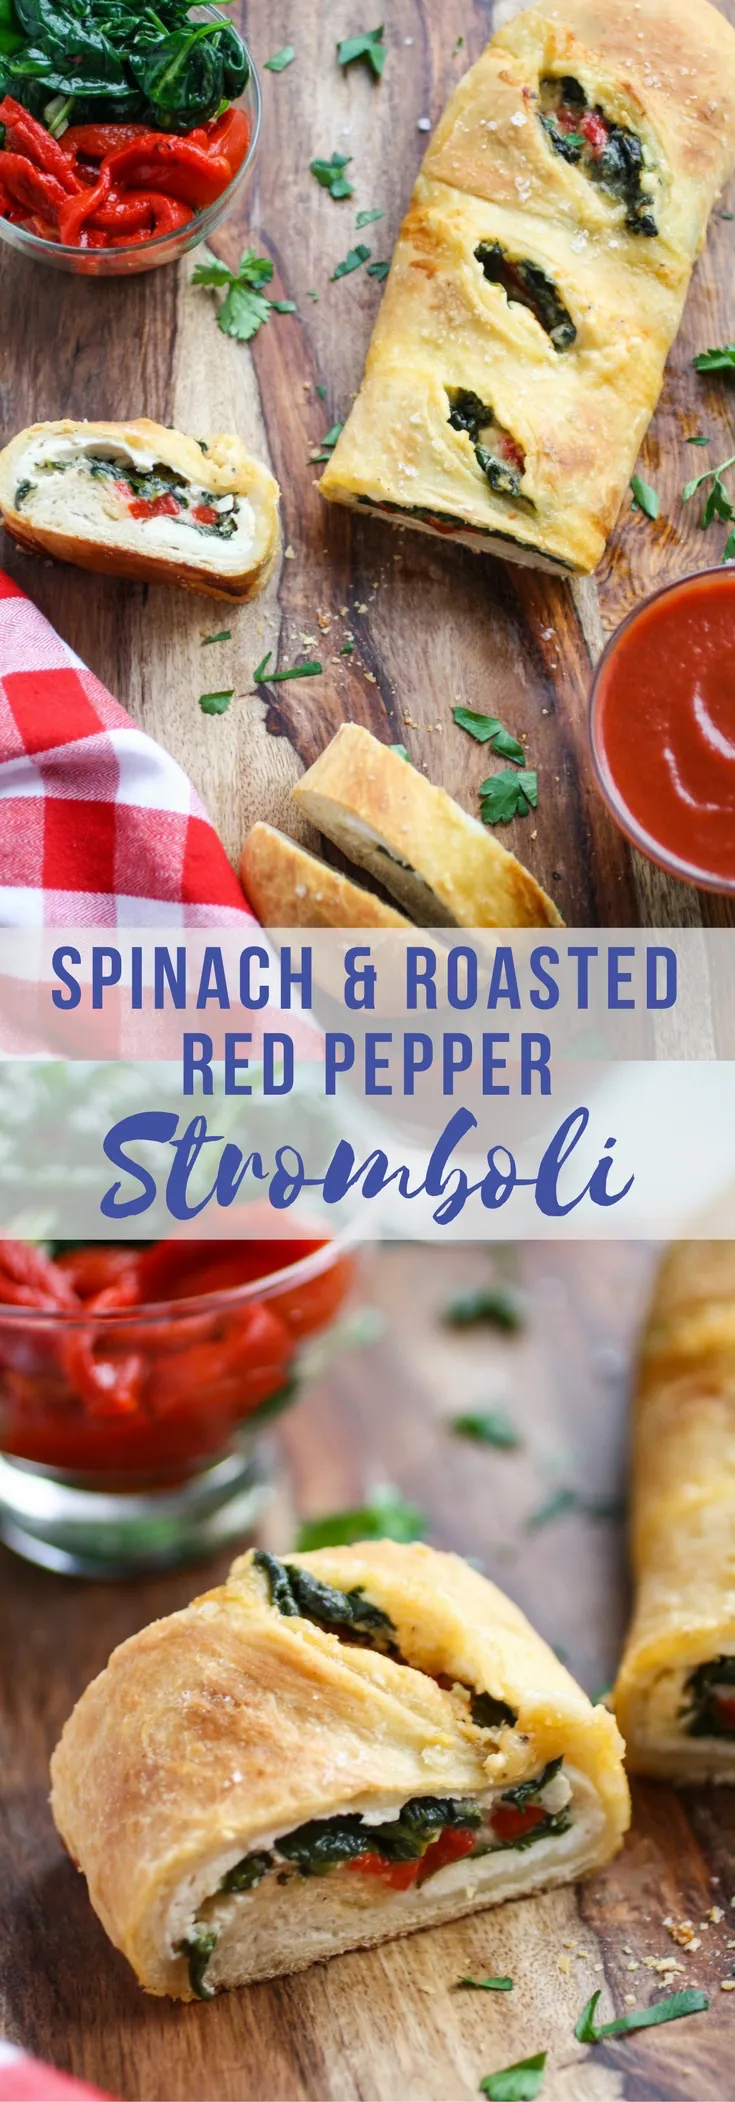 Spinach and Roasted Red Pepper Stromboli is a delicious dish, similar to pizza -- what a treat! Stromboli is perfect to serve at any gathering, or even on movie night!